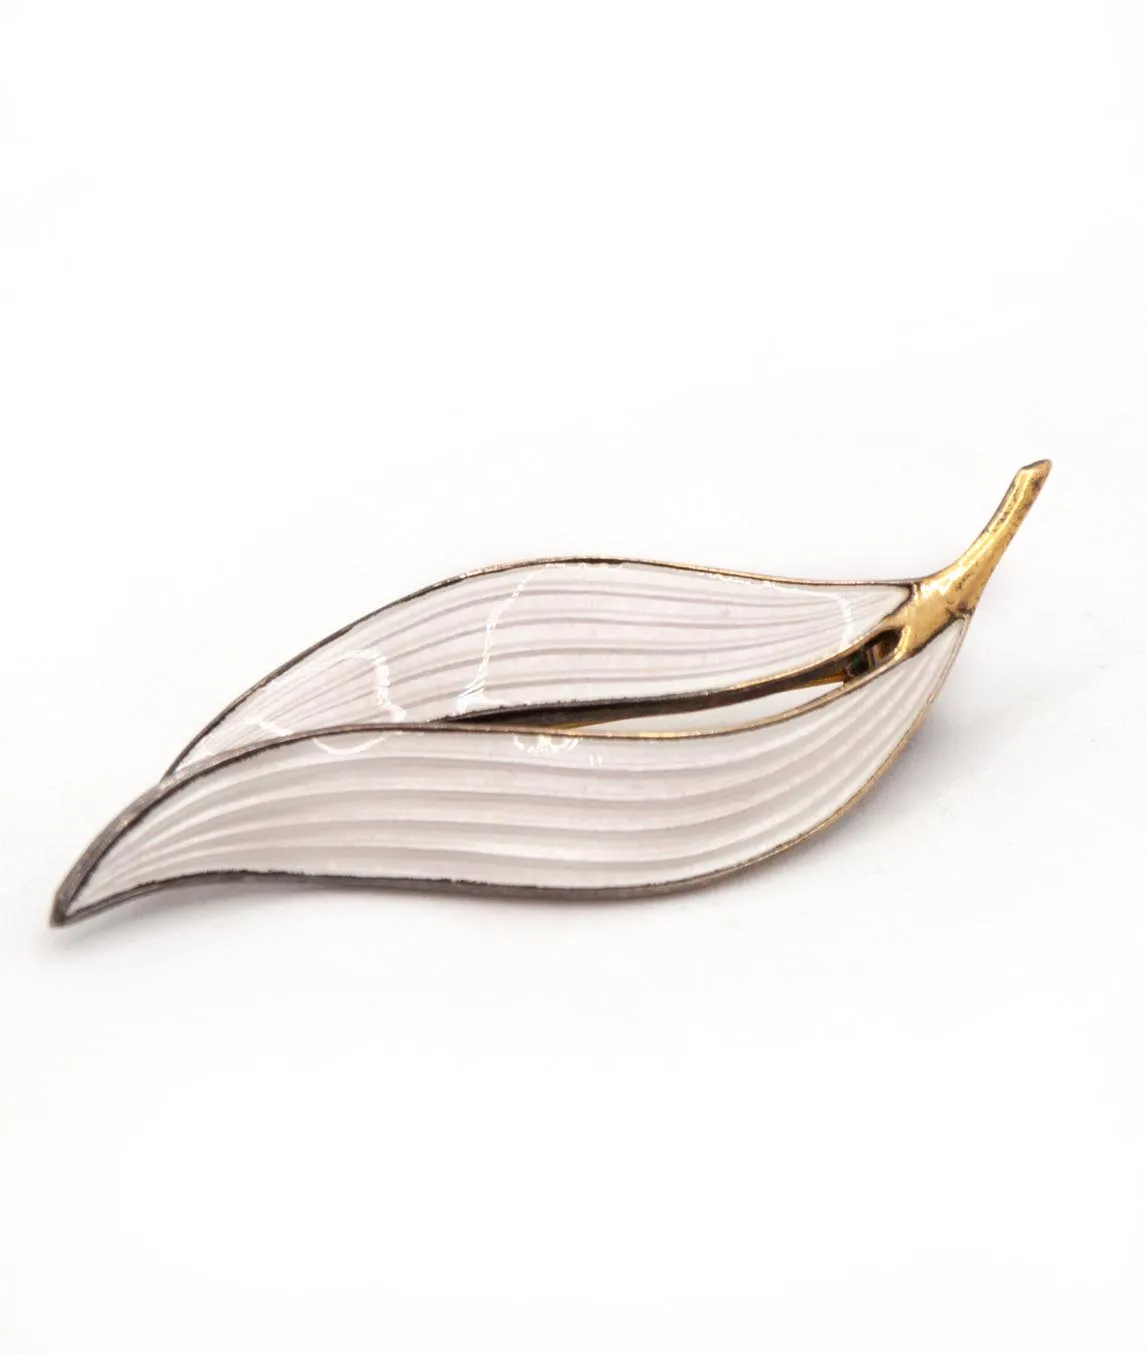 Aksel Holmsen double leaf brooch with lined white enamel with gilded silver stem